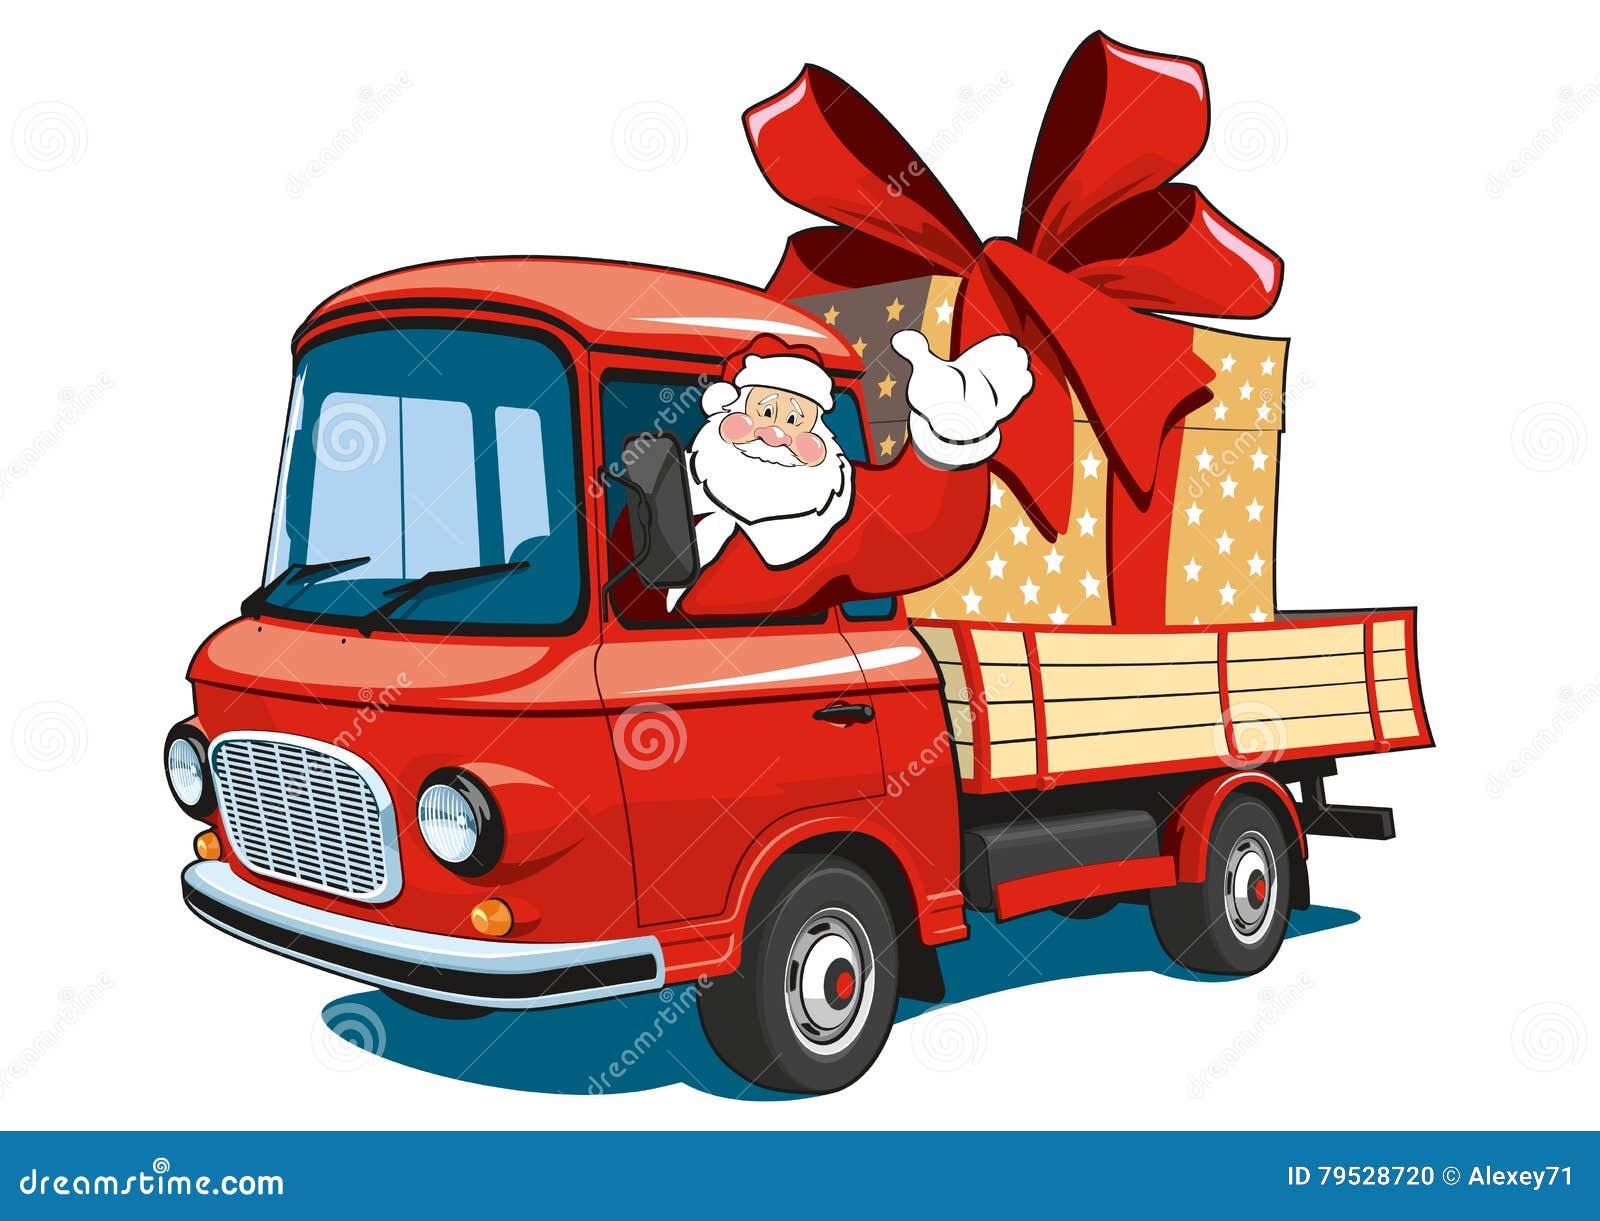 Santa Claus On Red Truck Delivers Gifts. Stock Vector